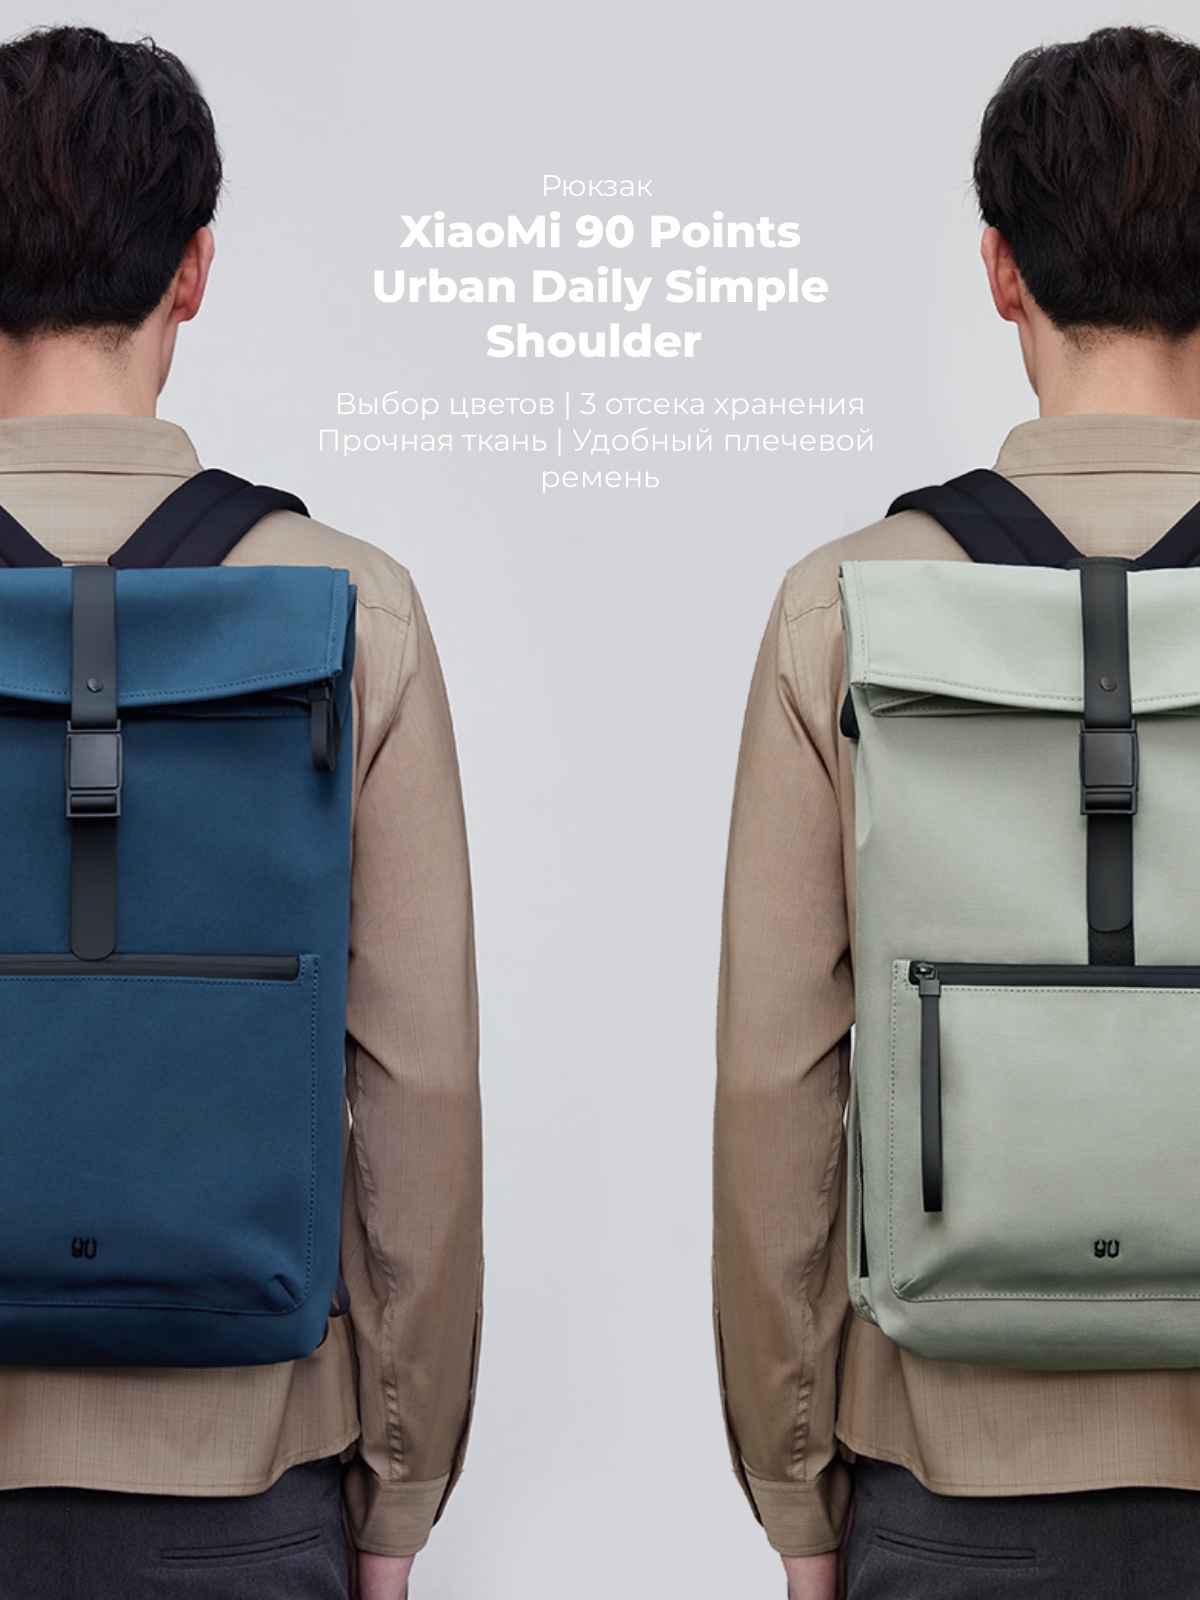 XiaoMi-90-Points-Urban-Daily-Simple-Shoulder-01